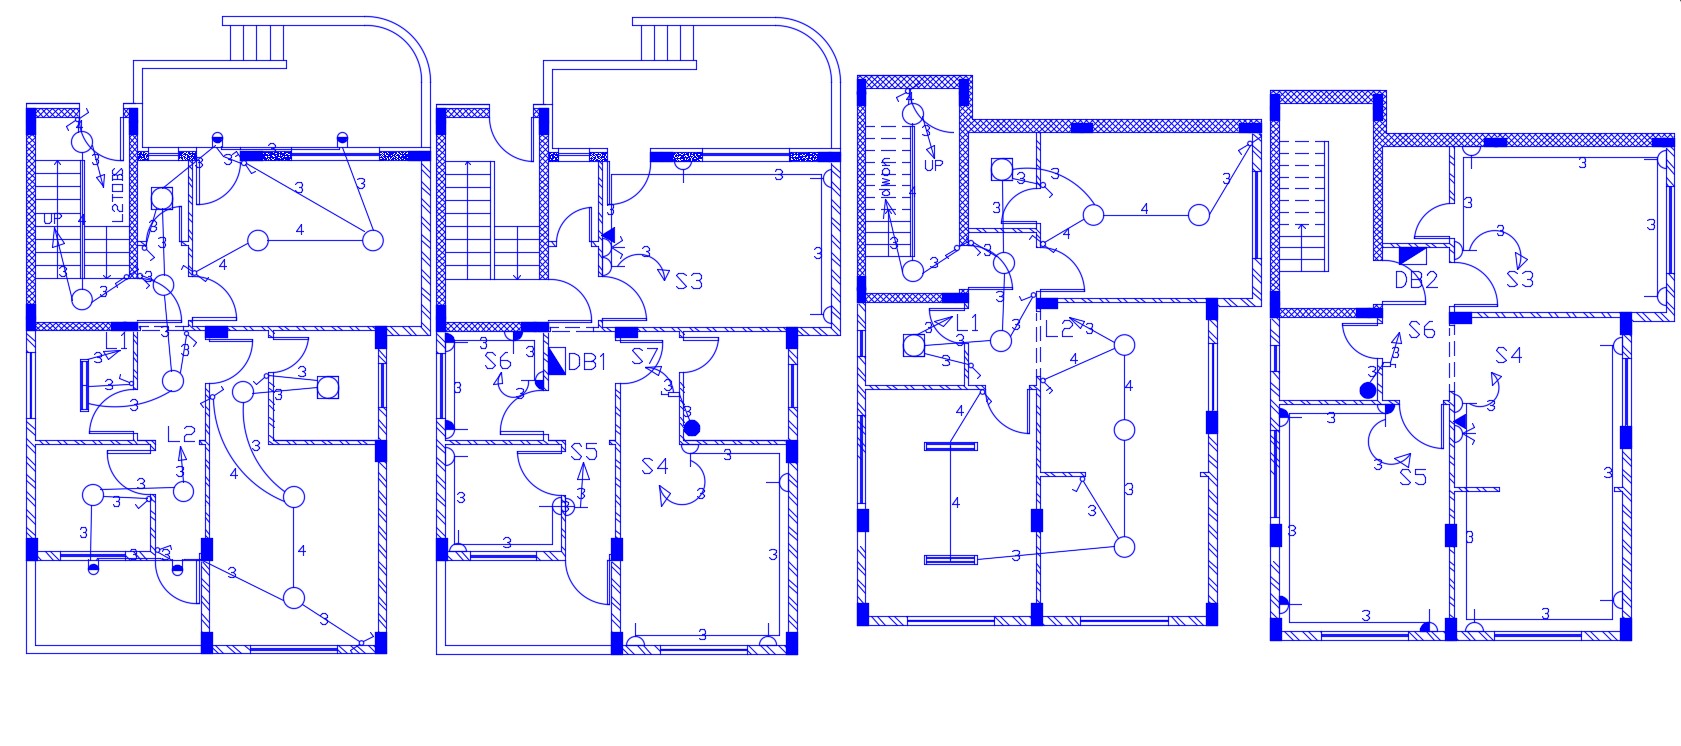  House  Electrical  Layout  With Column Plan  DWG File Cadbull